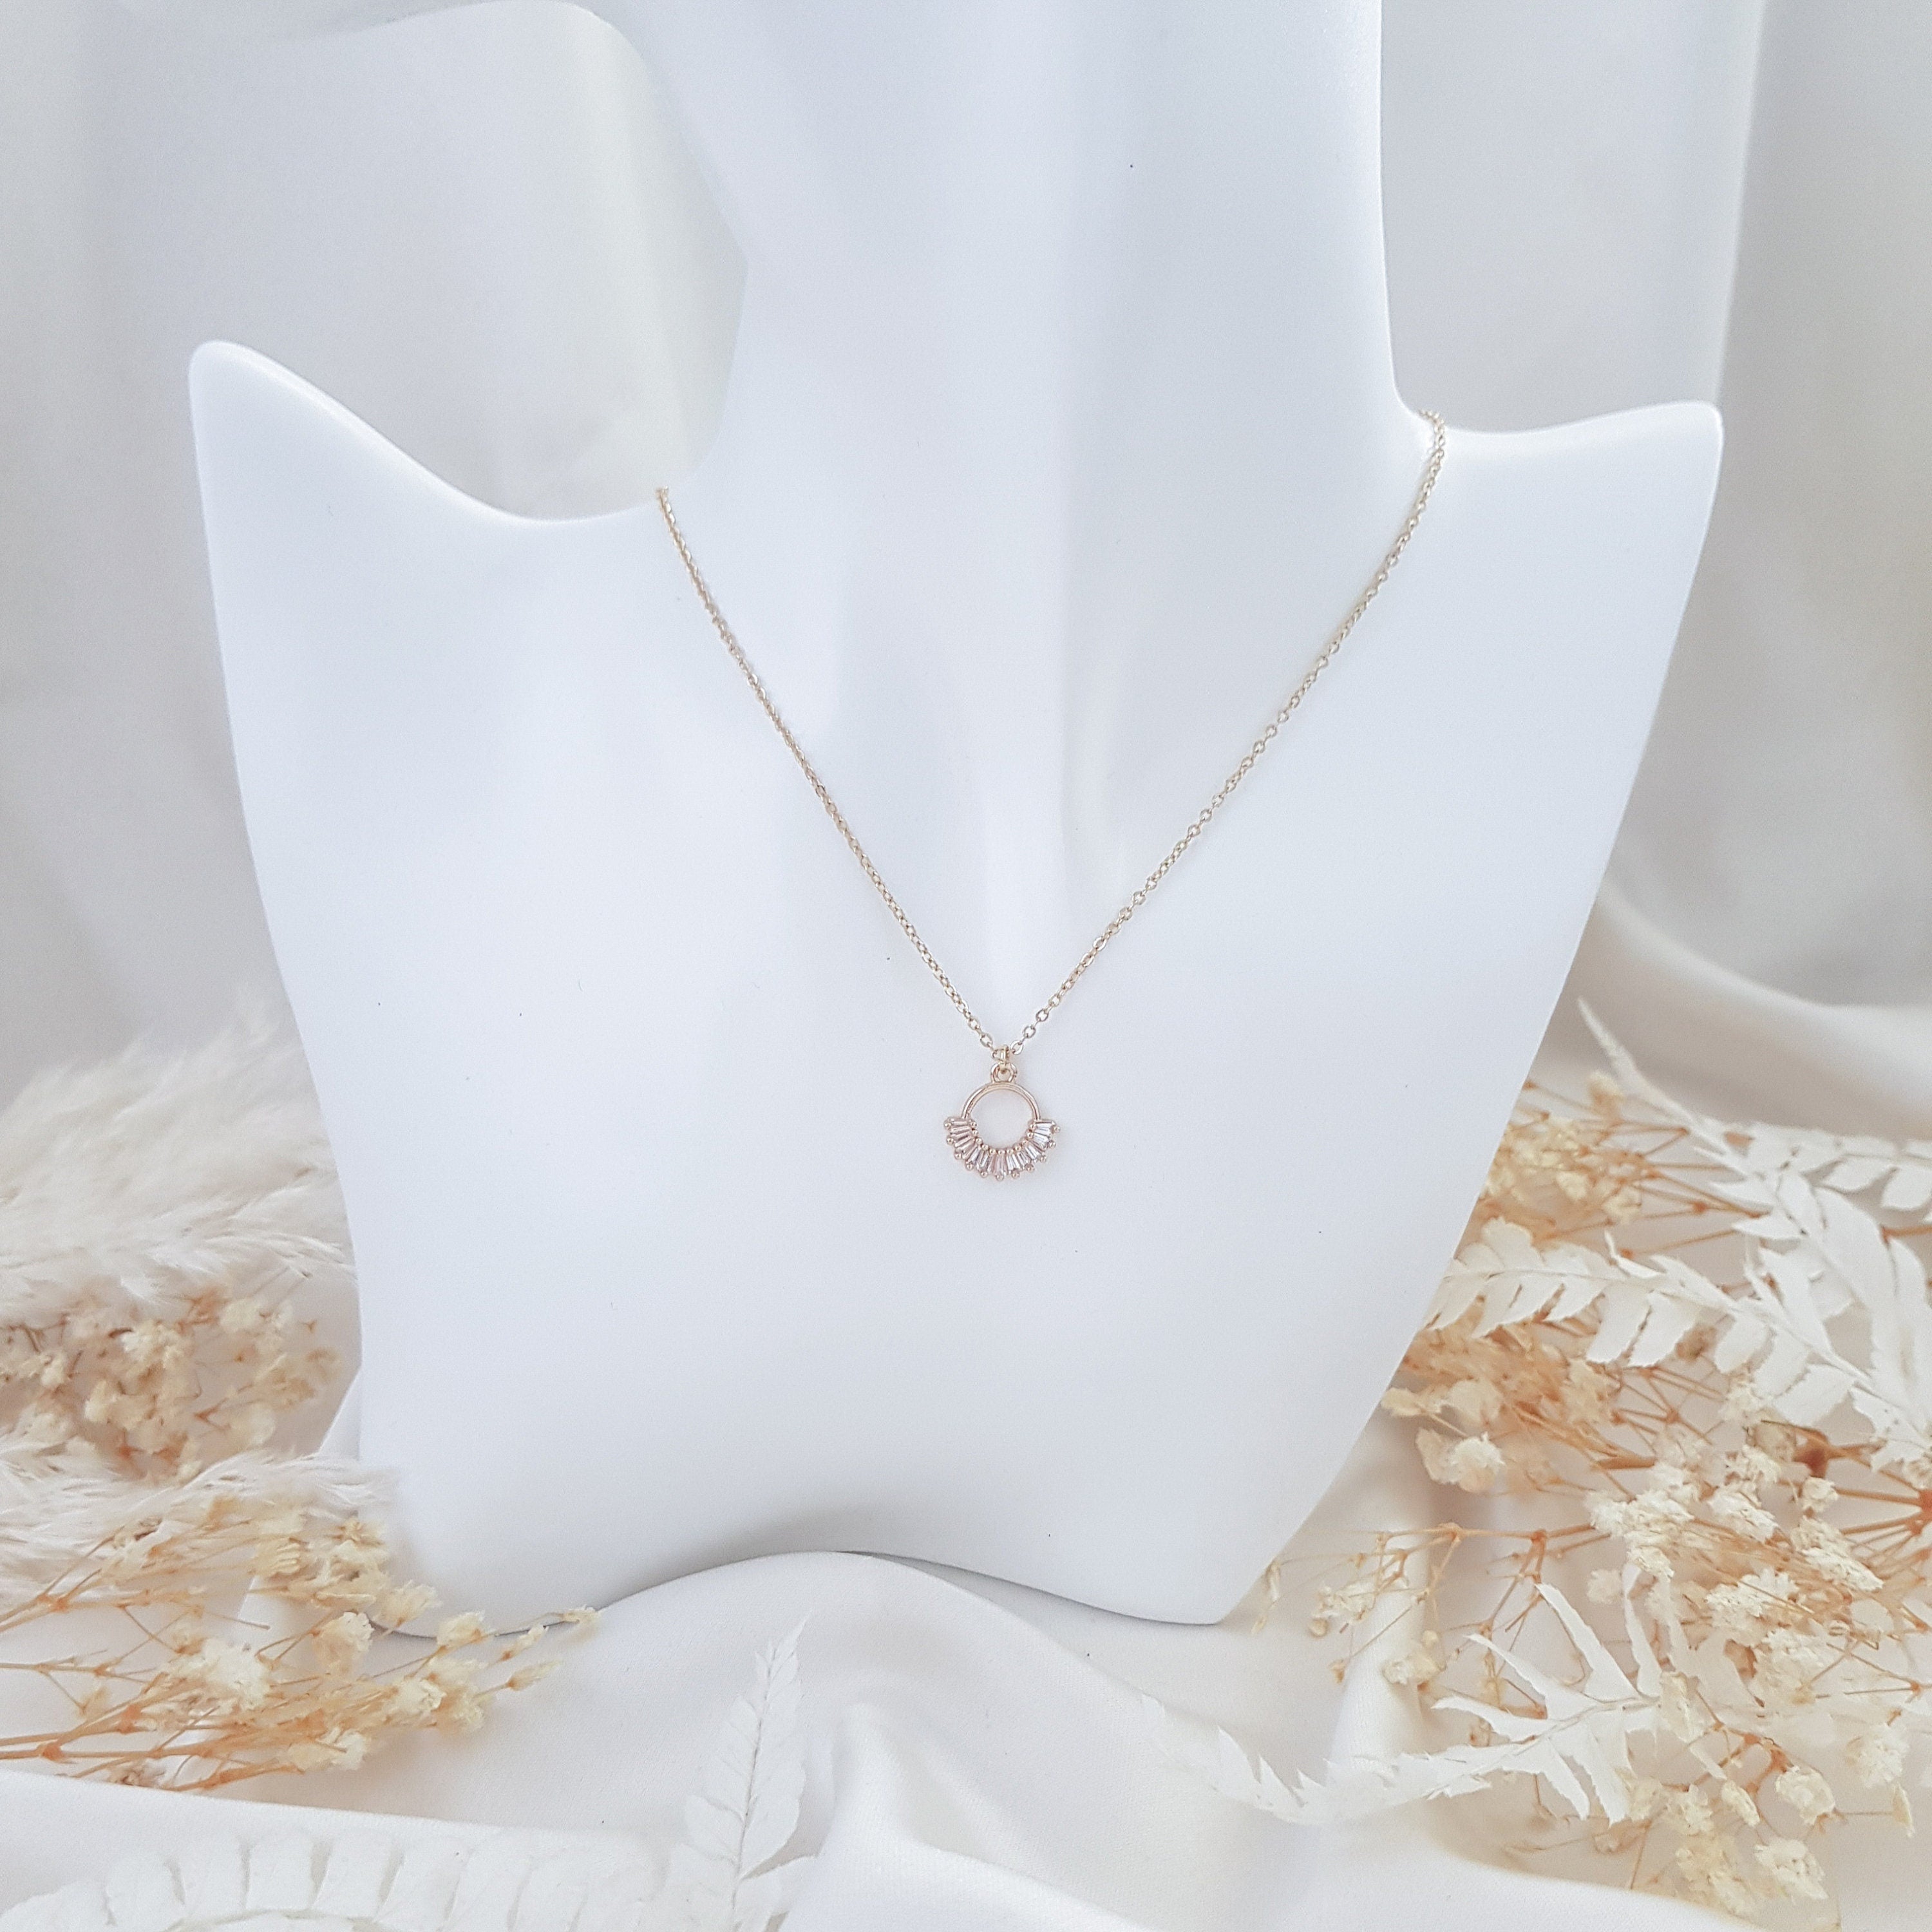 Gold zirconia crystal bridal necklace, Boho wedding necklace, Dainty minimalist necklace, Crystal wedding jewellery, Jewellery for brides